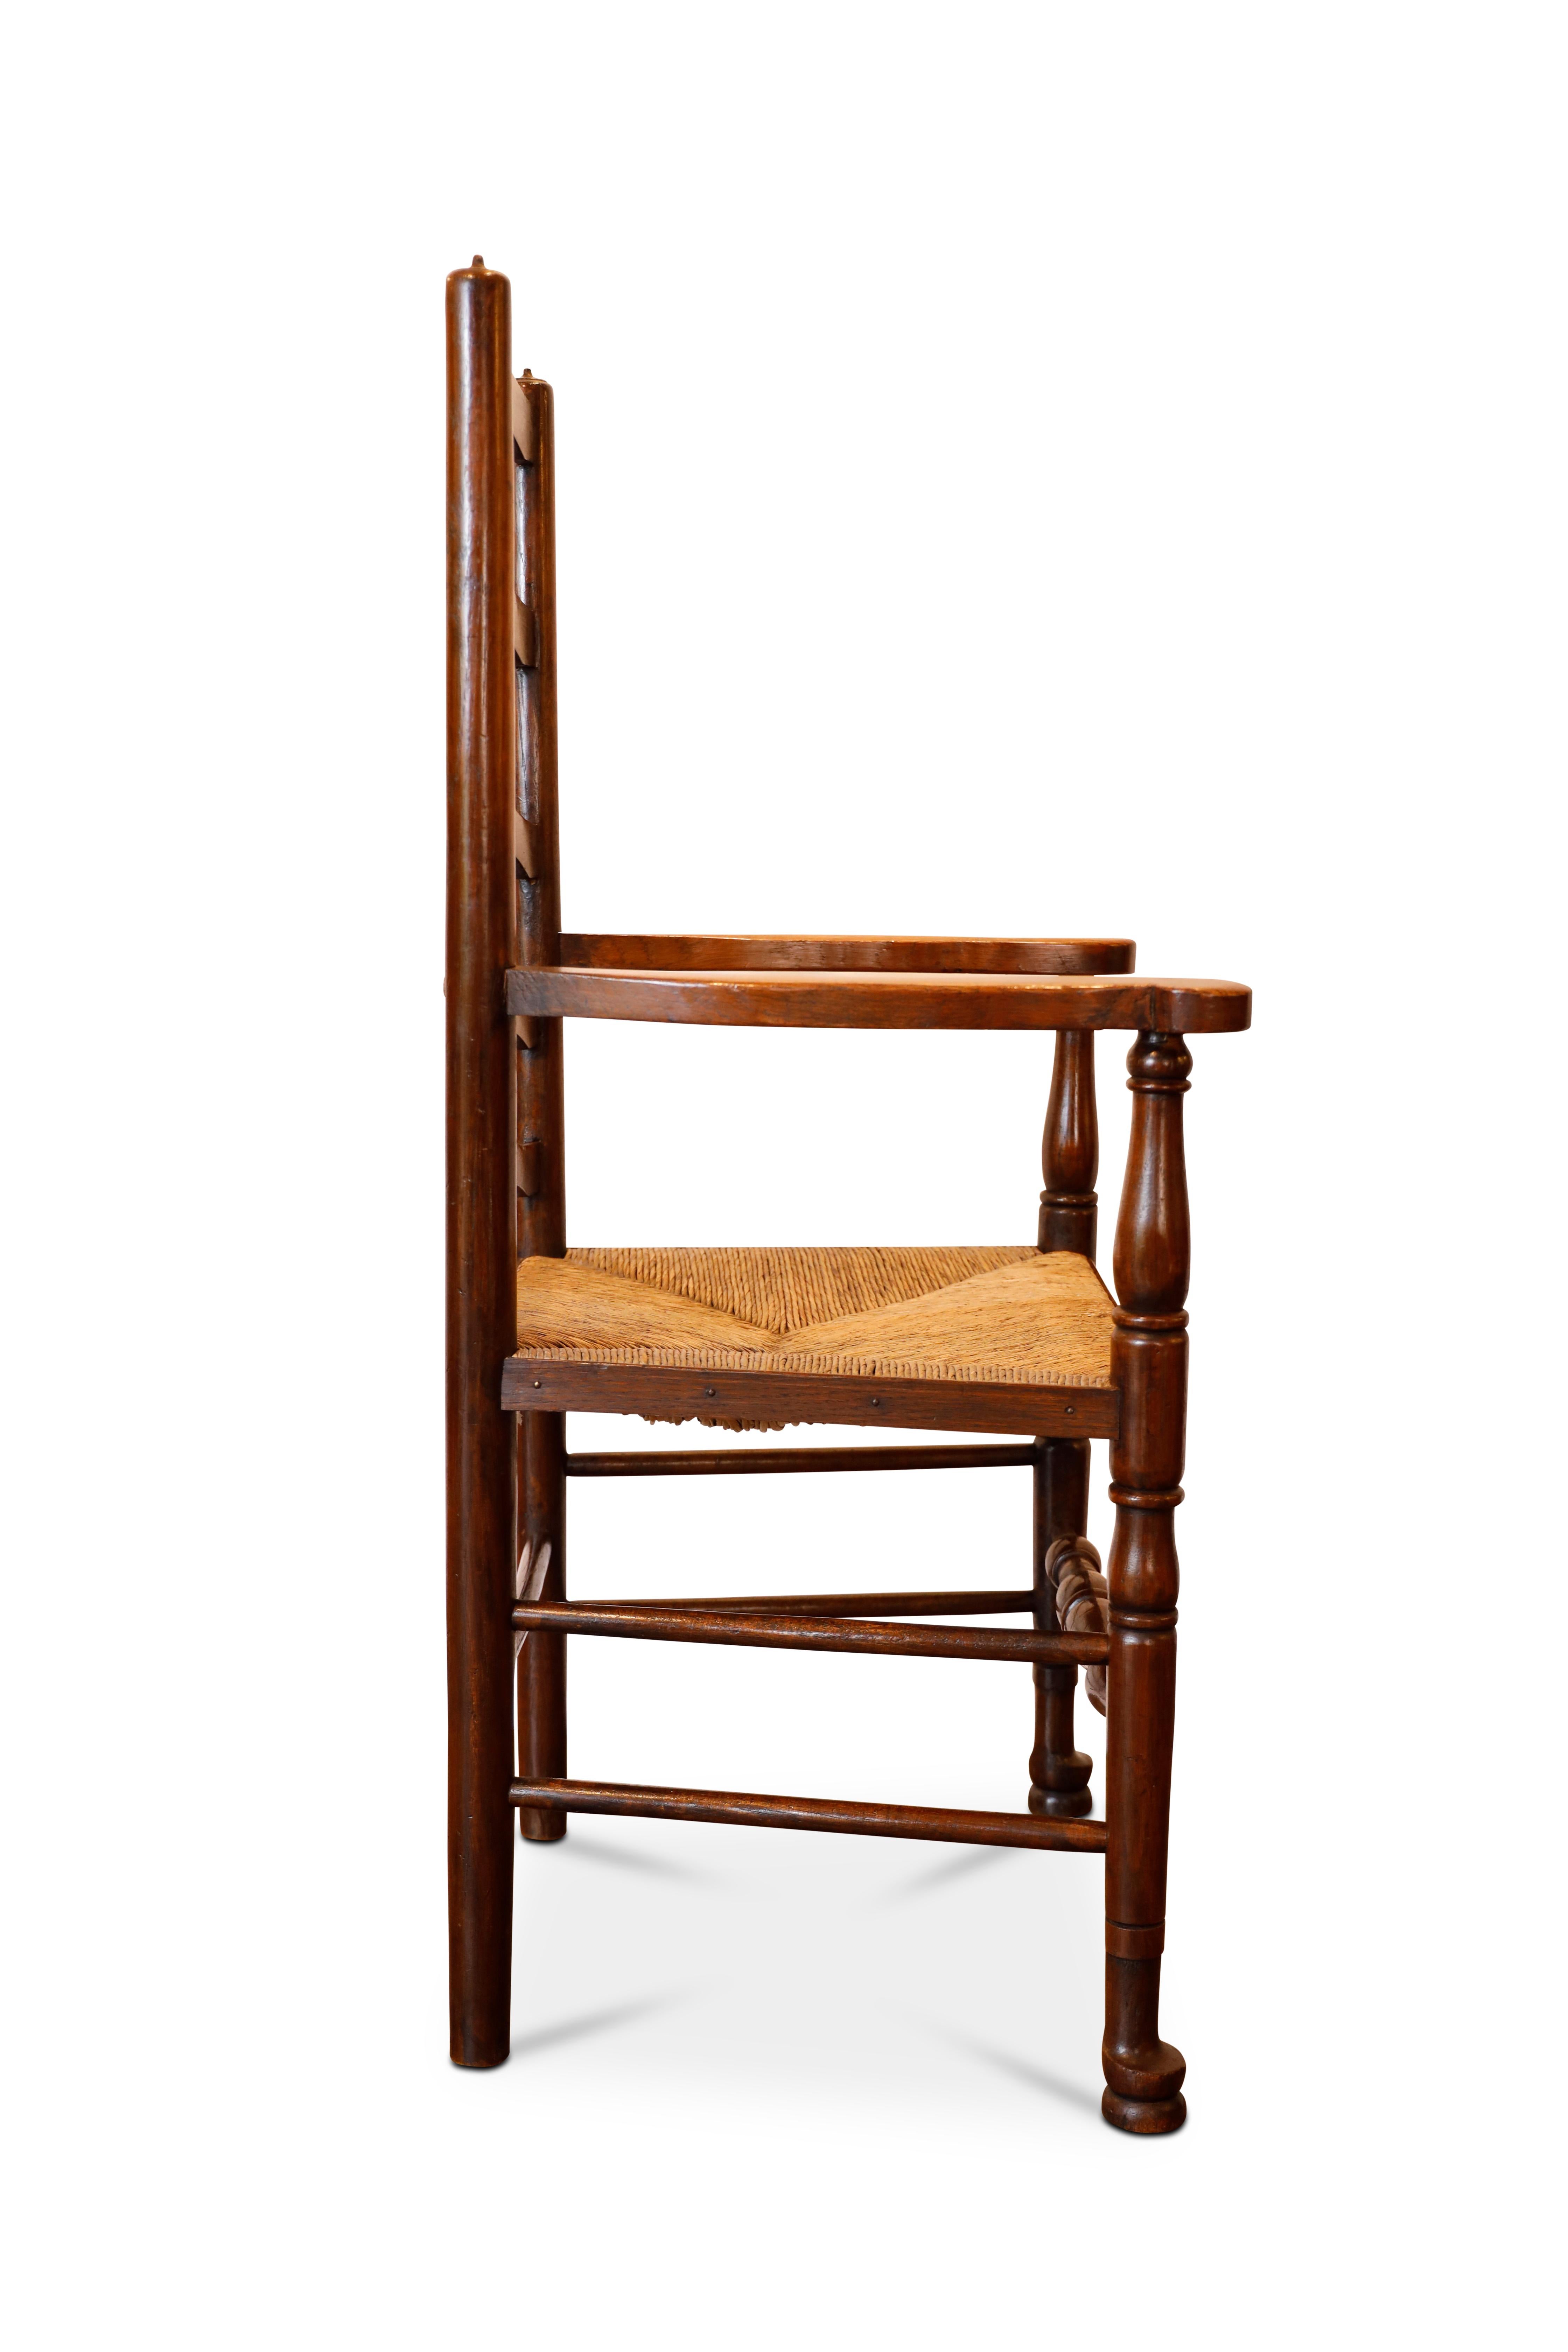 19th Century English Ladder Back Chairs For Sale